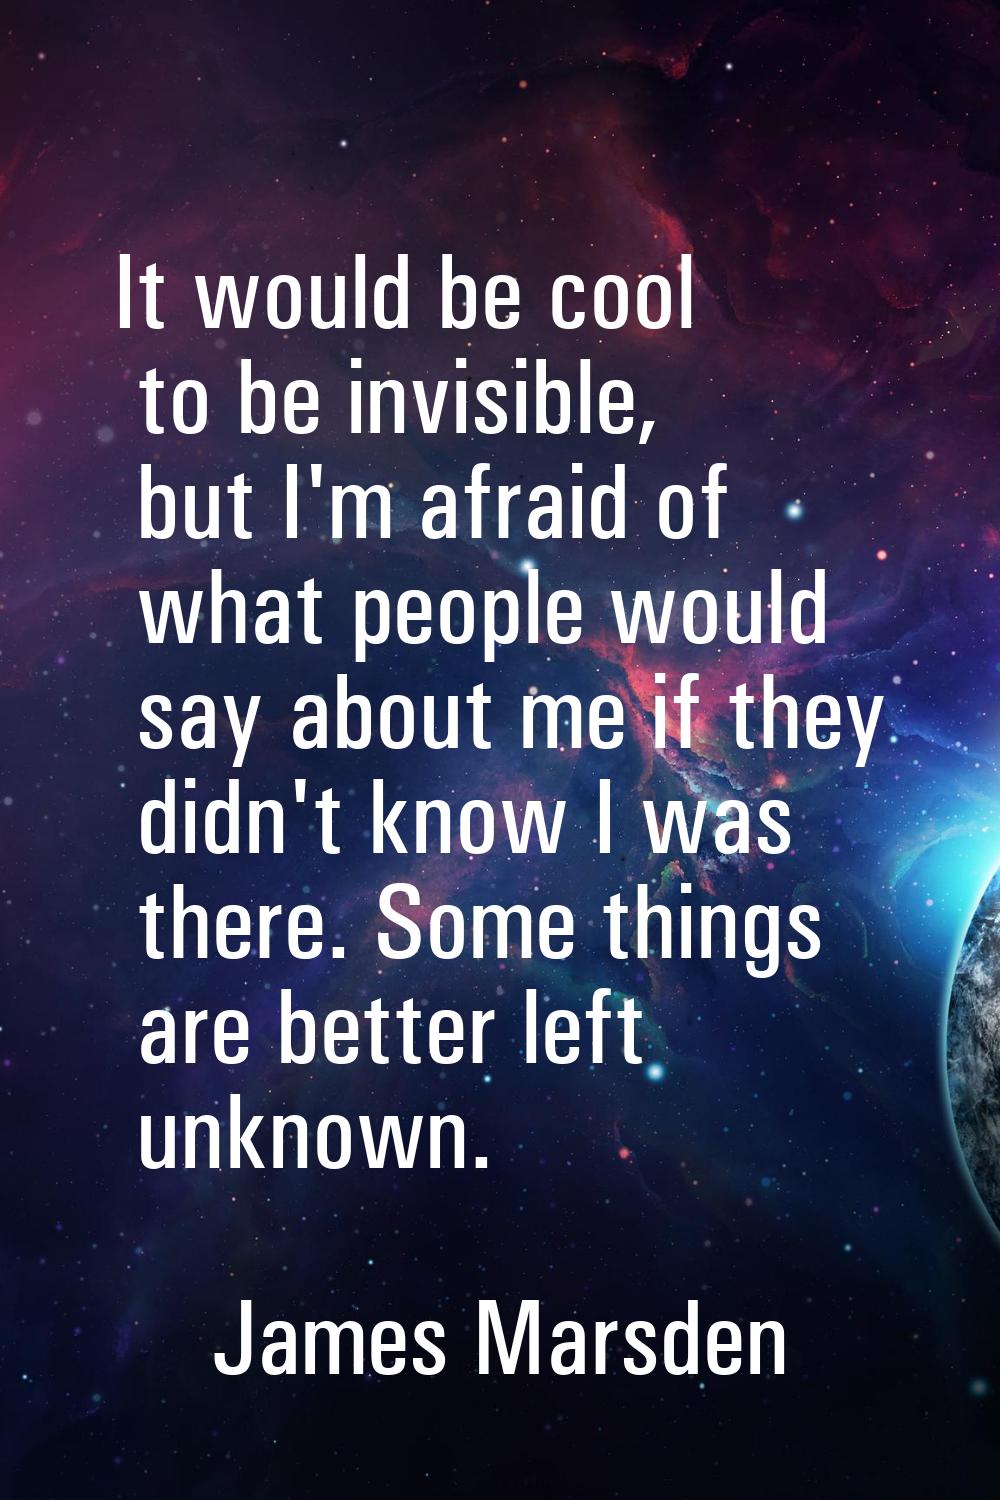 It would be cool to be invisible, but I'm afraid of what people would say about me if they didn't k